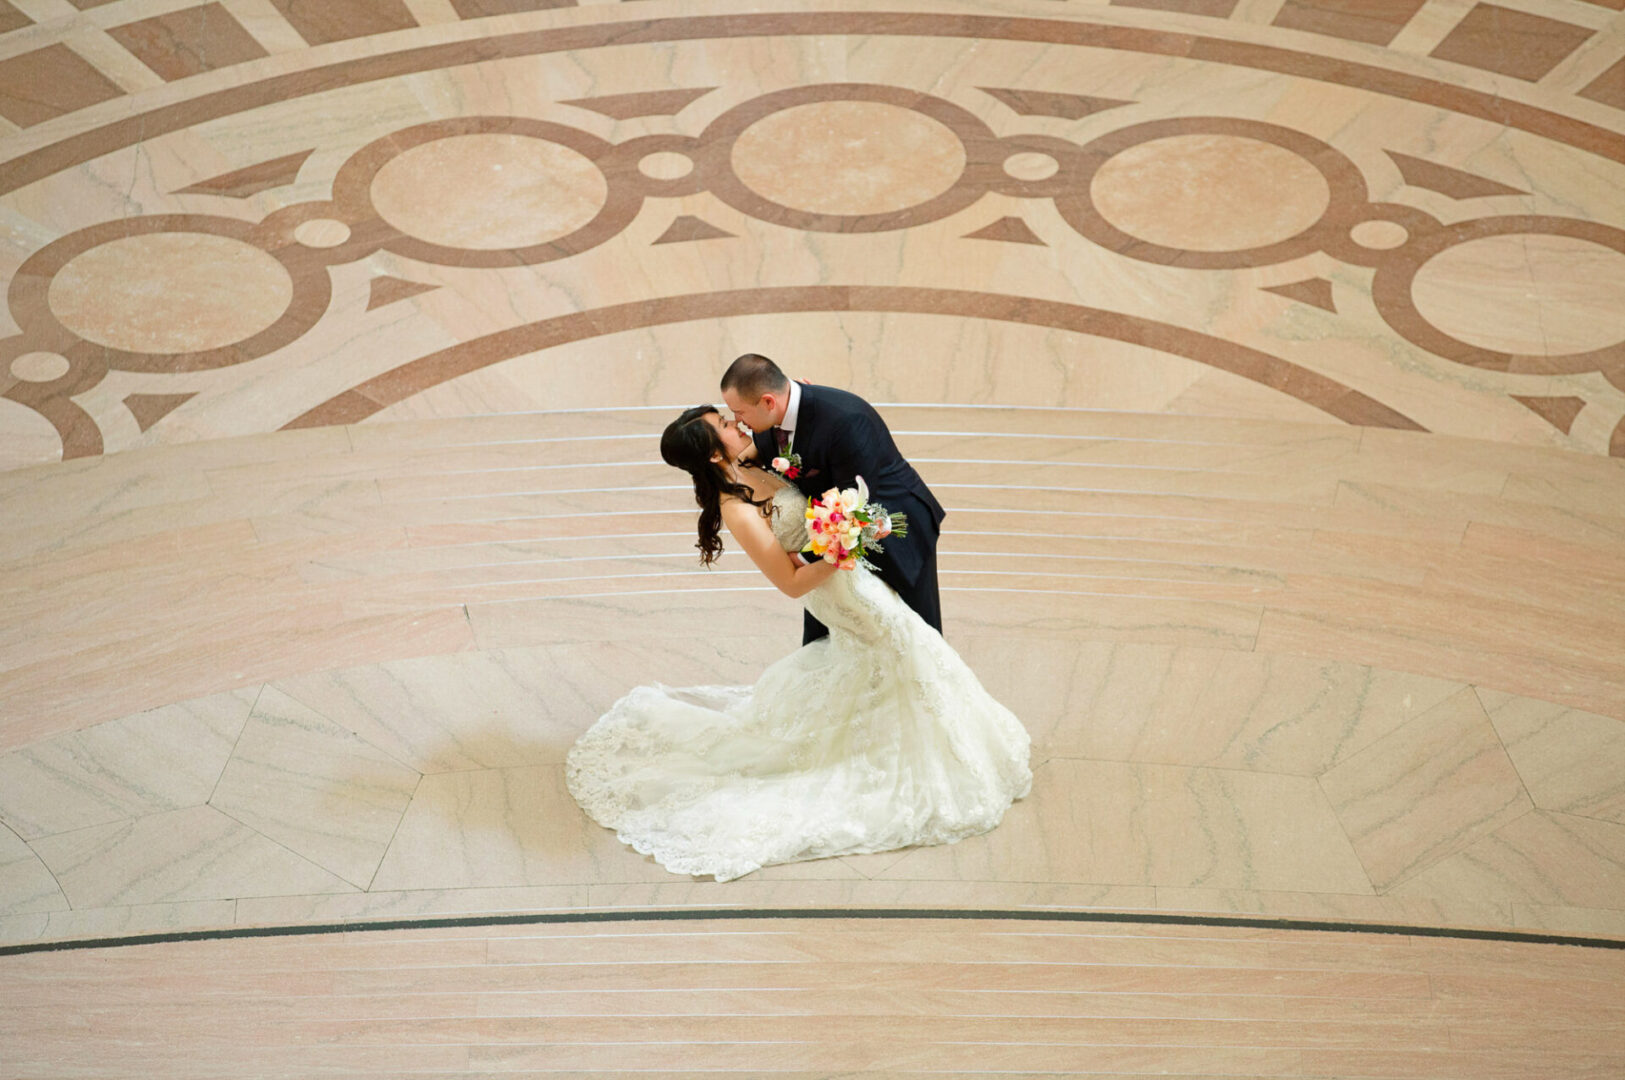 A newly married couple kissing in a kissing on a hall